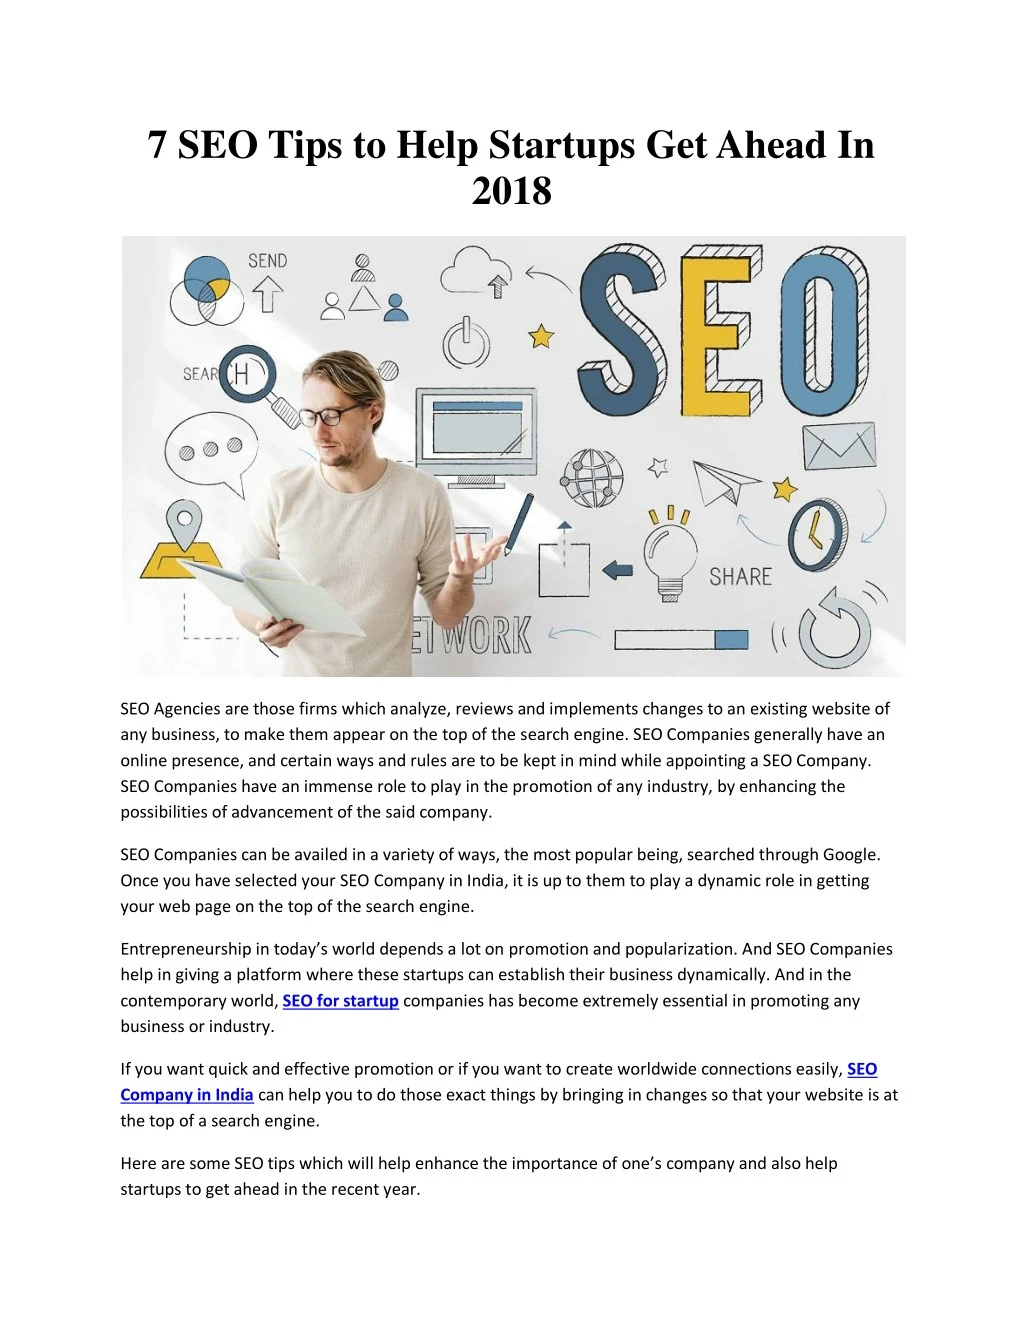 7 seo tips to help startups get ahead in 2018